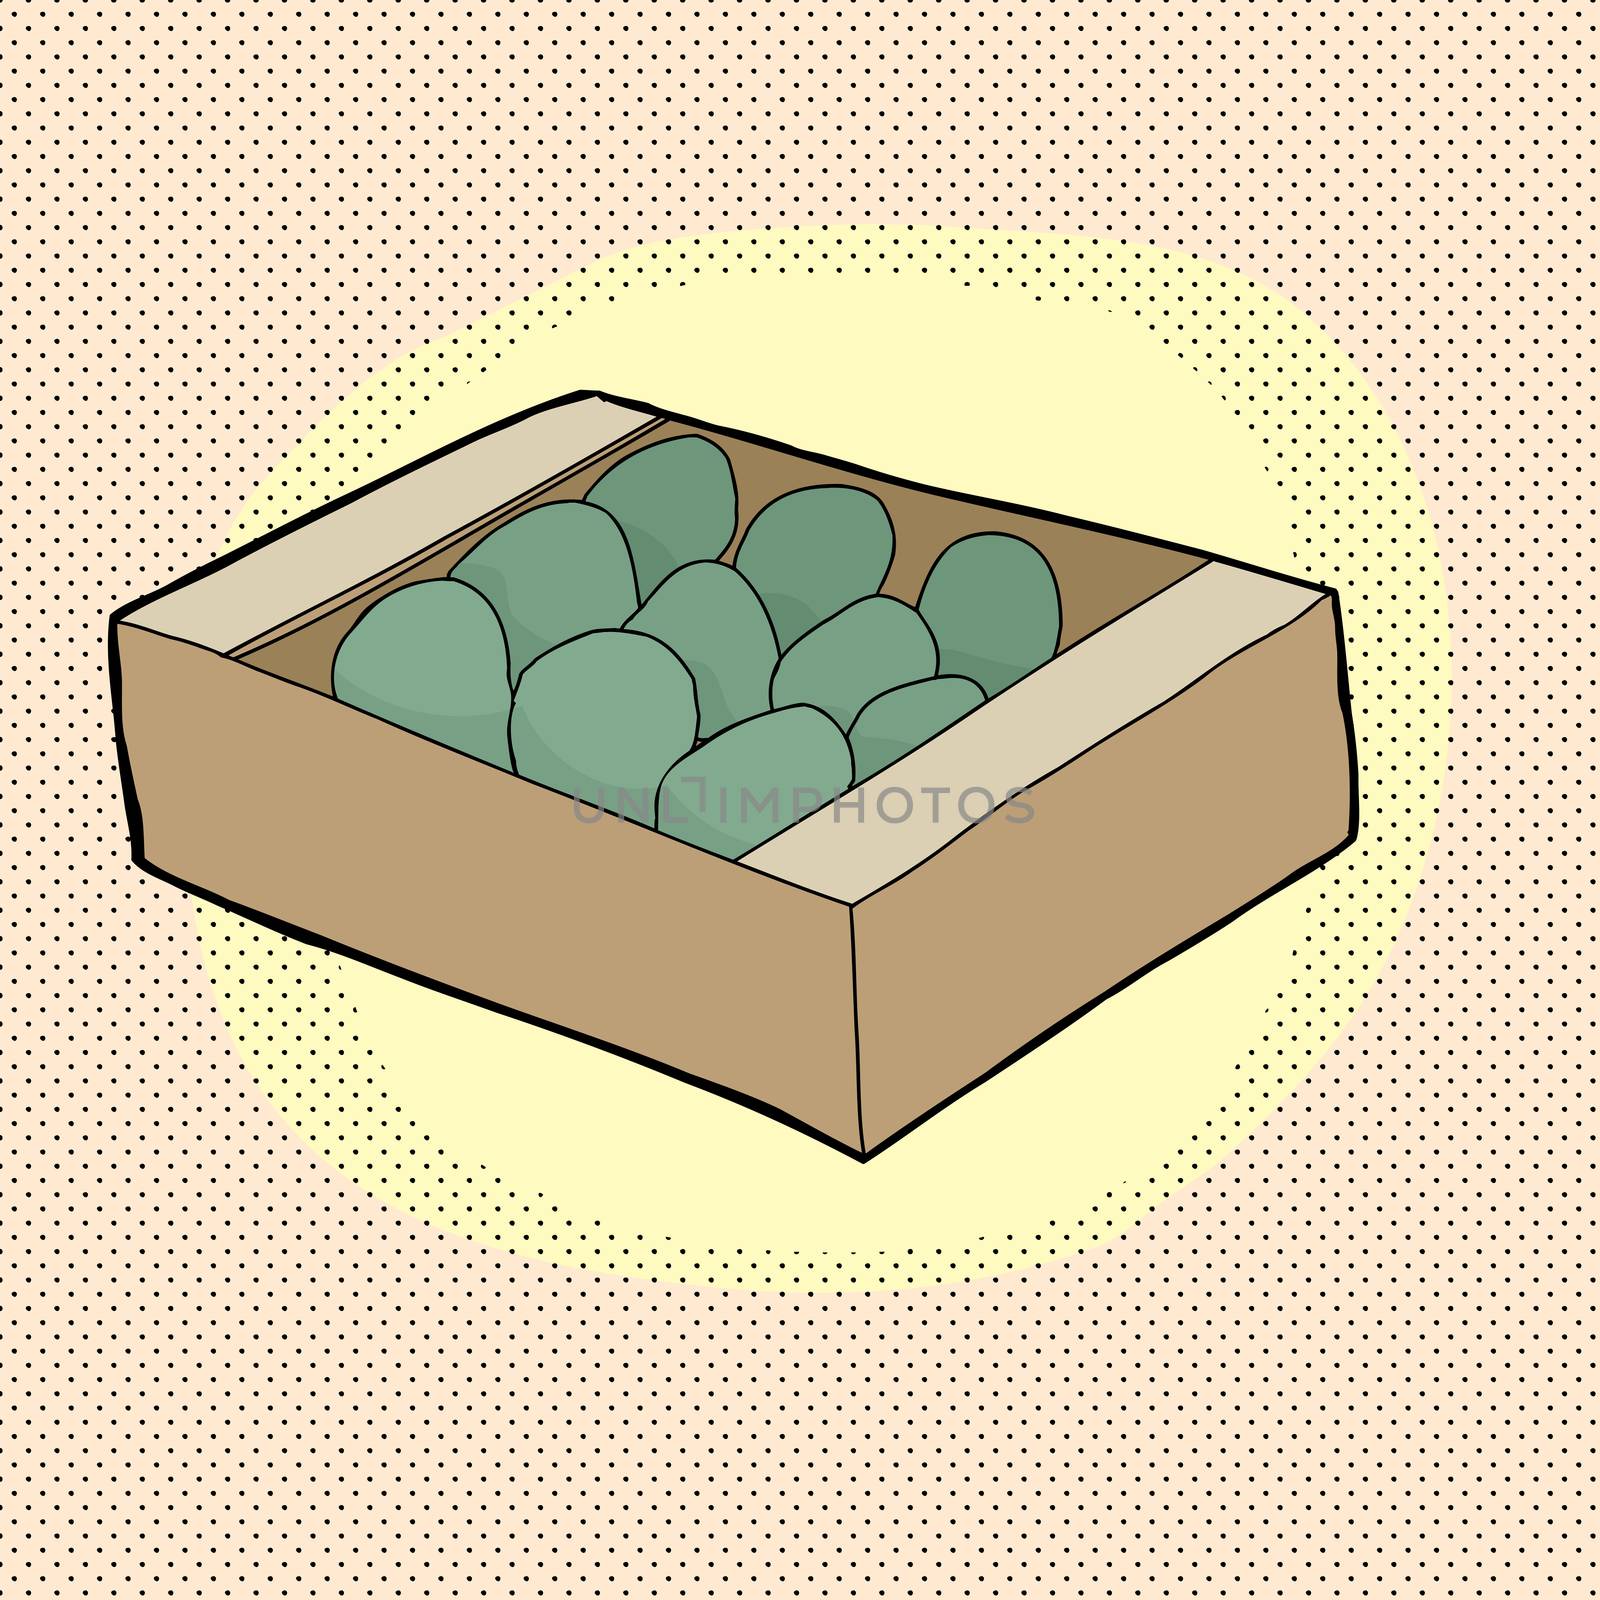 Box of avocados on yellow halftone background